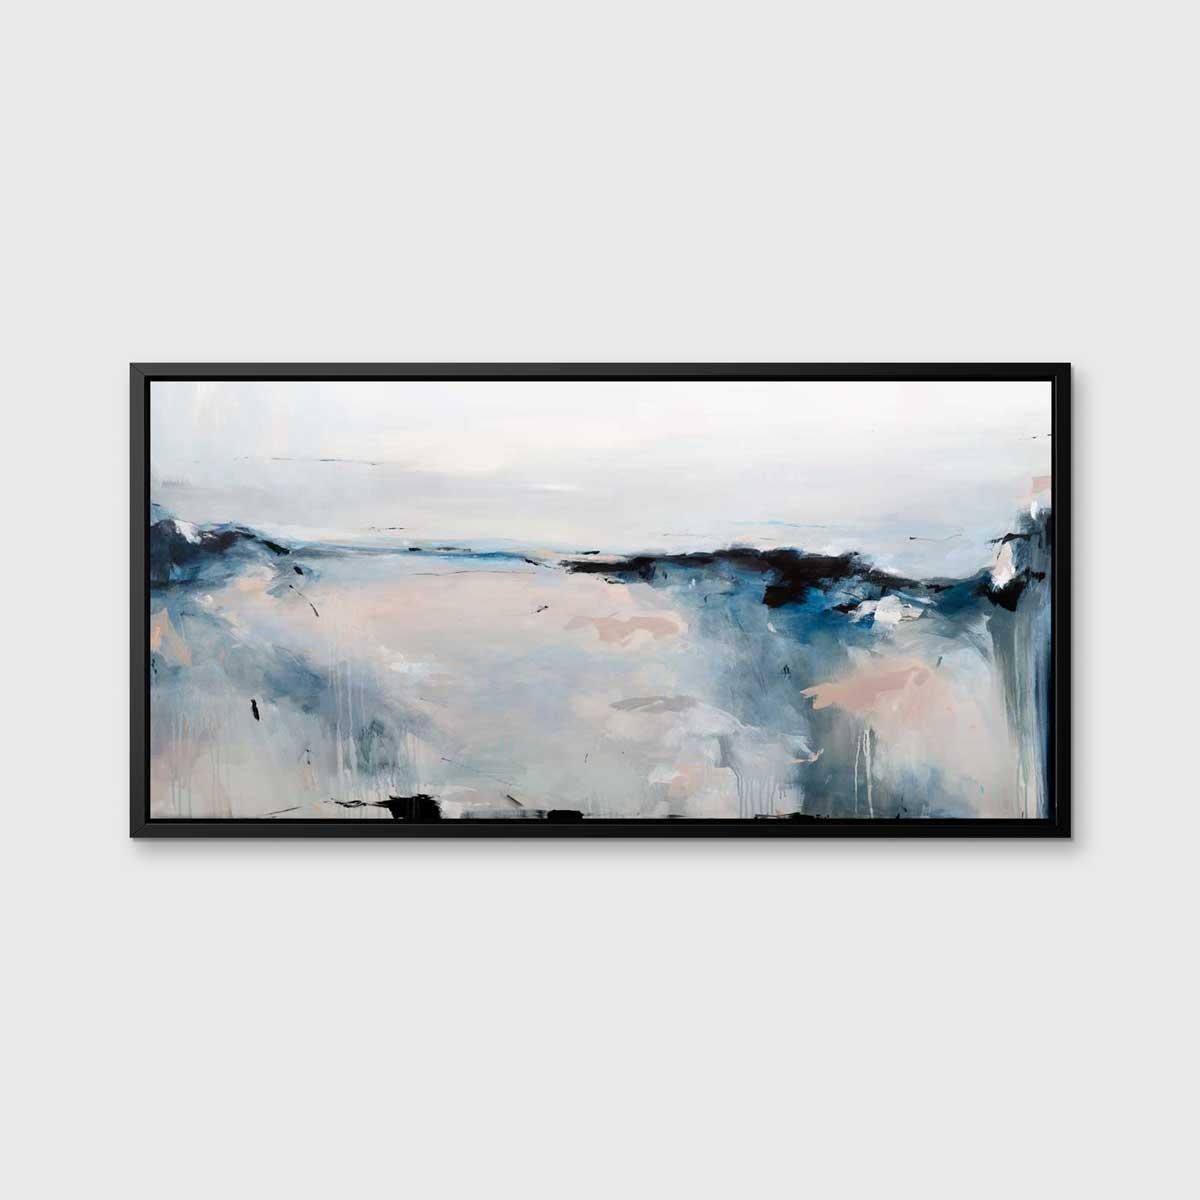 This abstract limited edition print by Kelly Rossetti features a cool palette and an abstracted landscape composition in a horizontal format. The artist's loose, expressive brush strokes come together in deep blue, grey, and pale pink accent tones